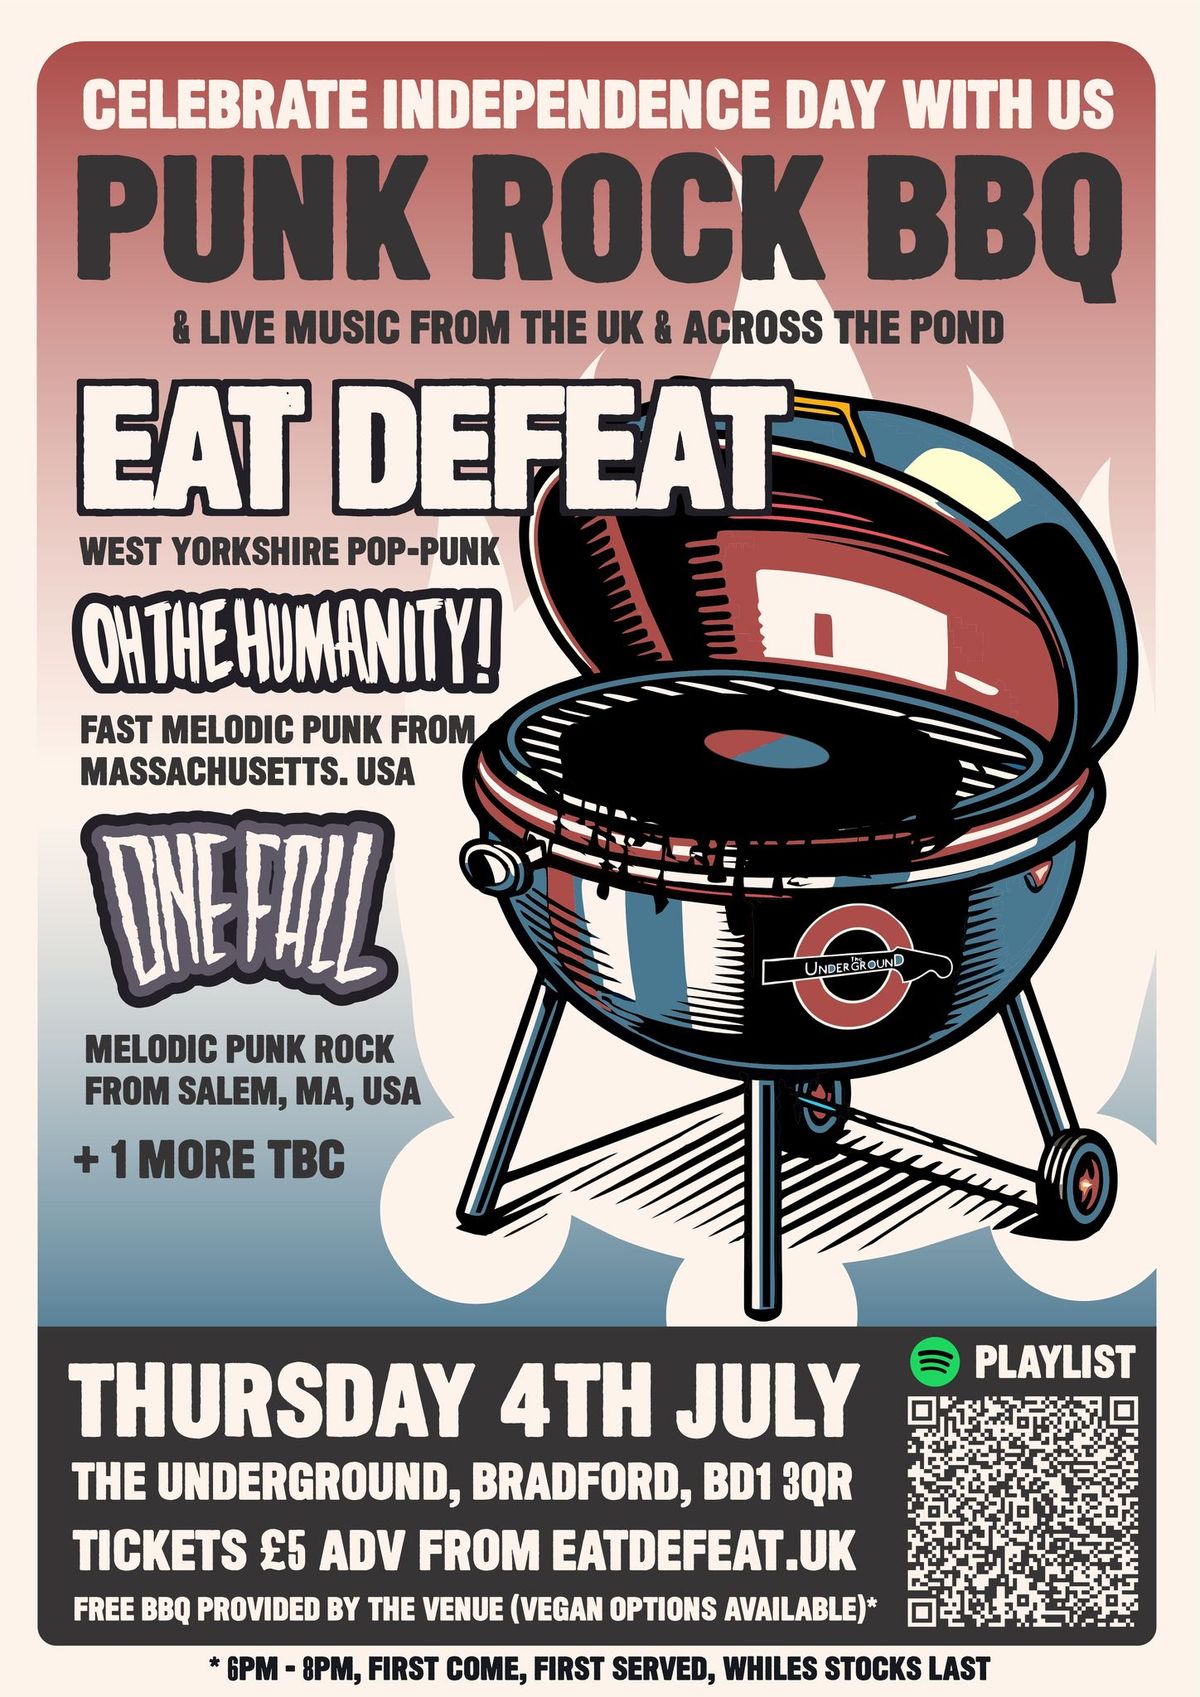 Punk Rock BBQ featuring EAT DEFEAT | OH THE HUMANITY! | ONE FALL + TBC